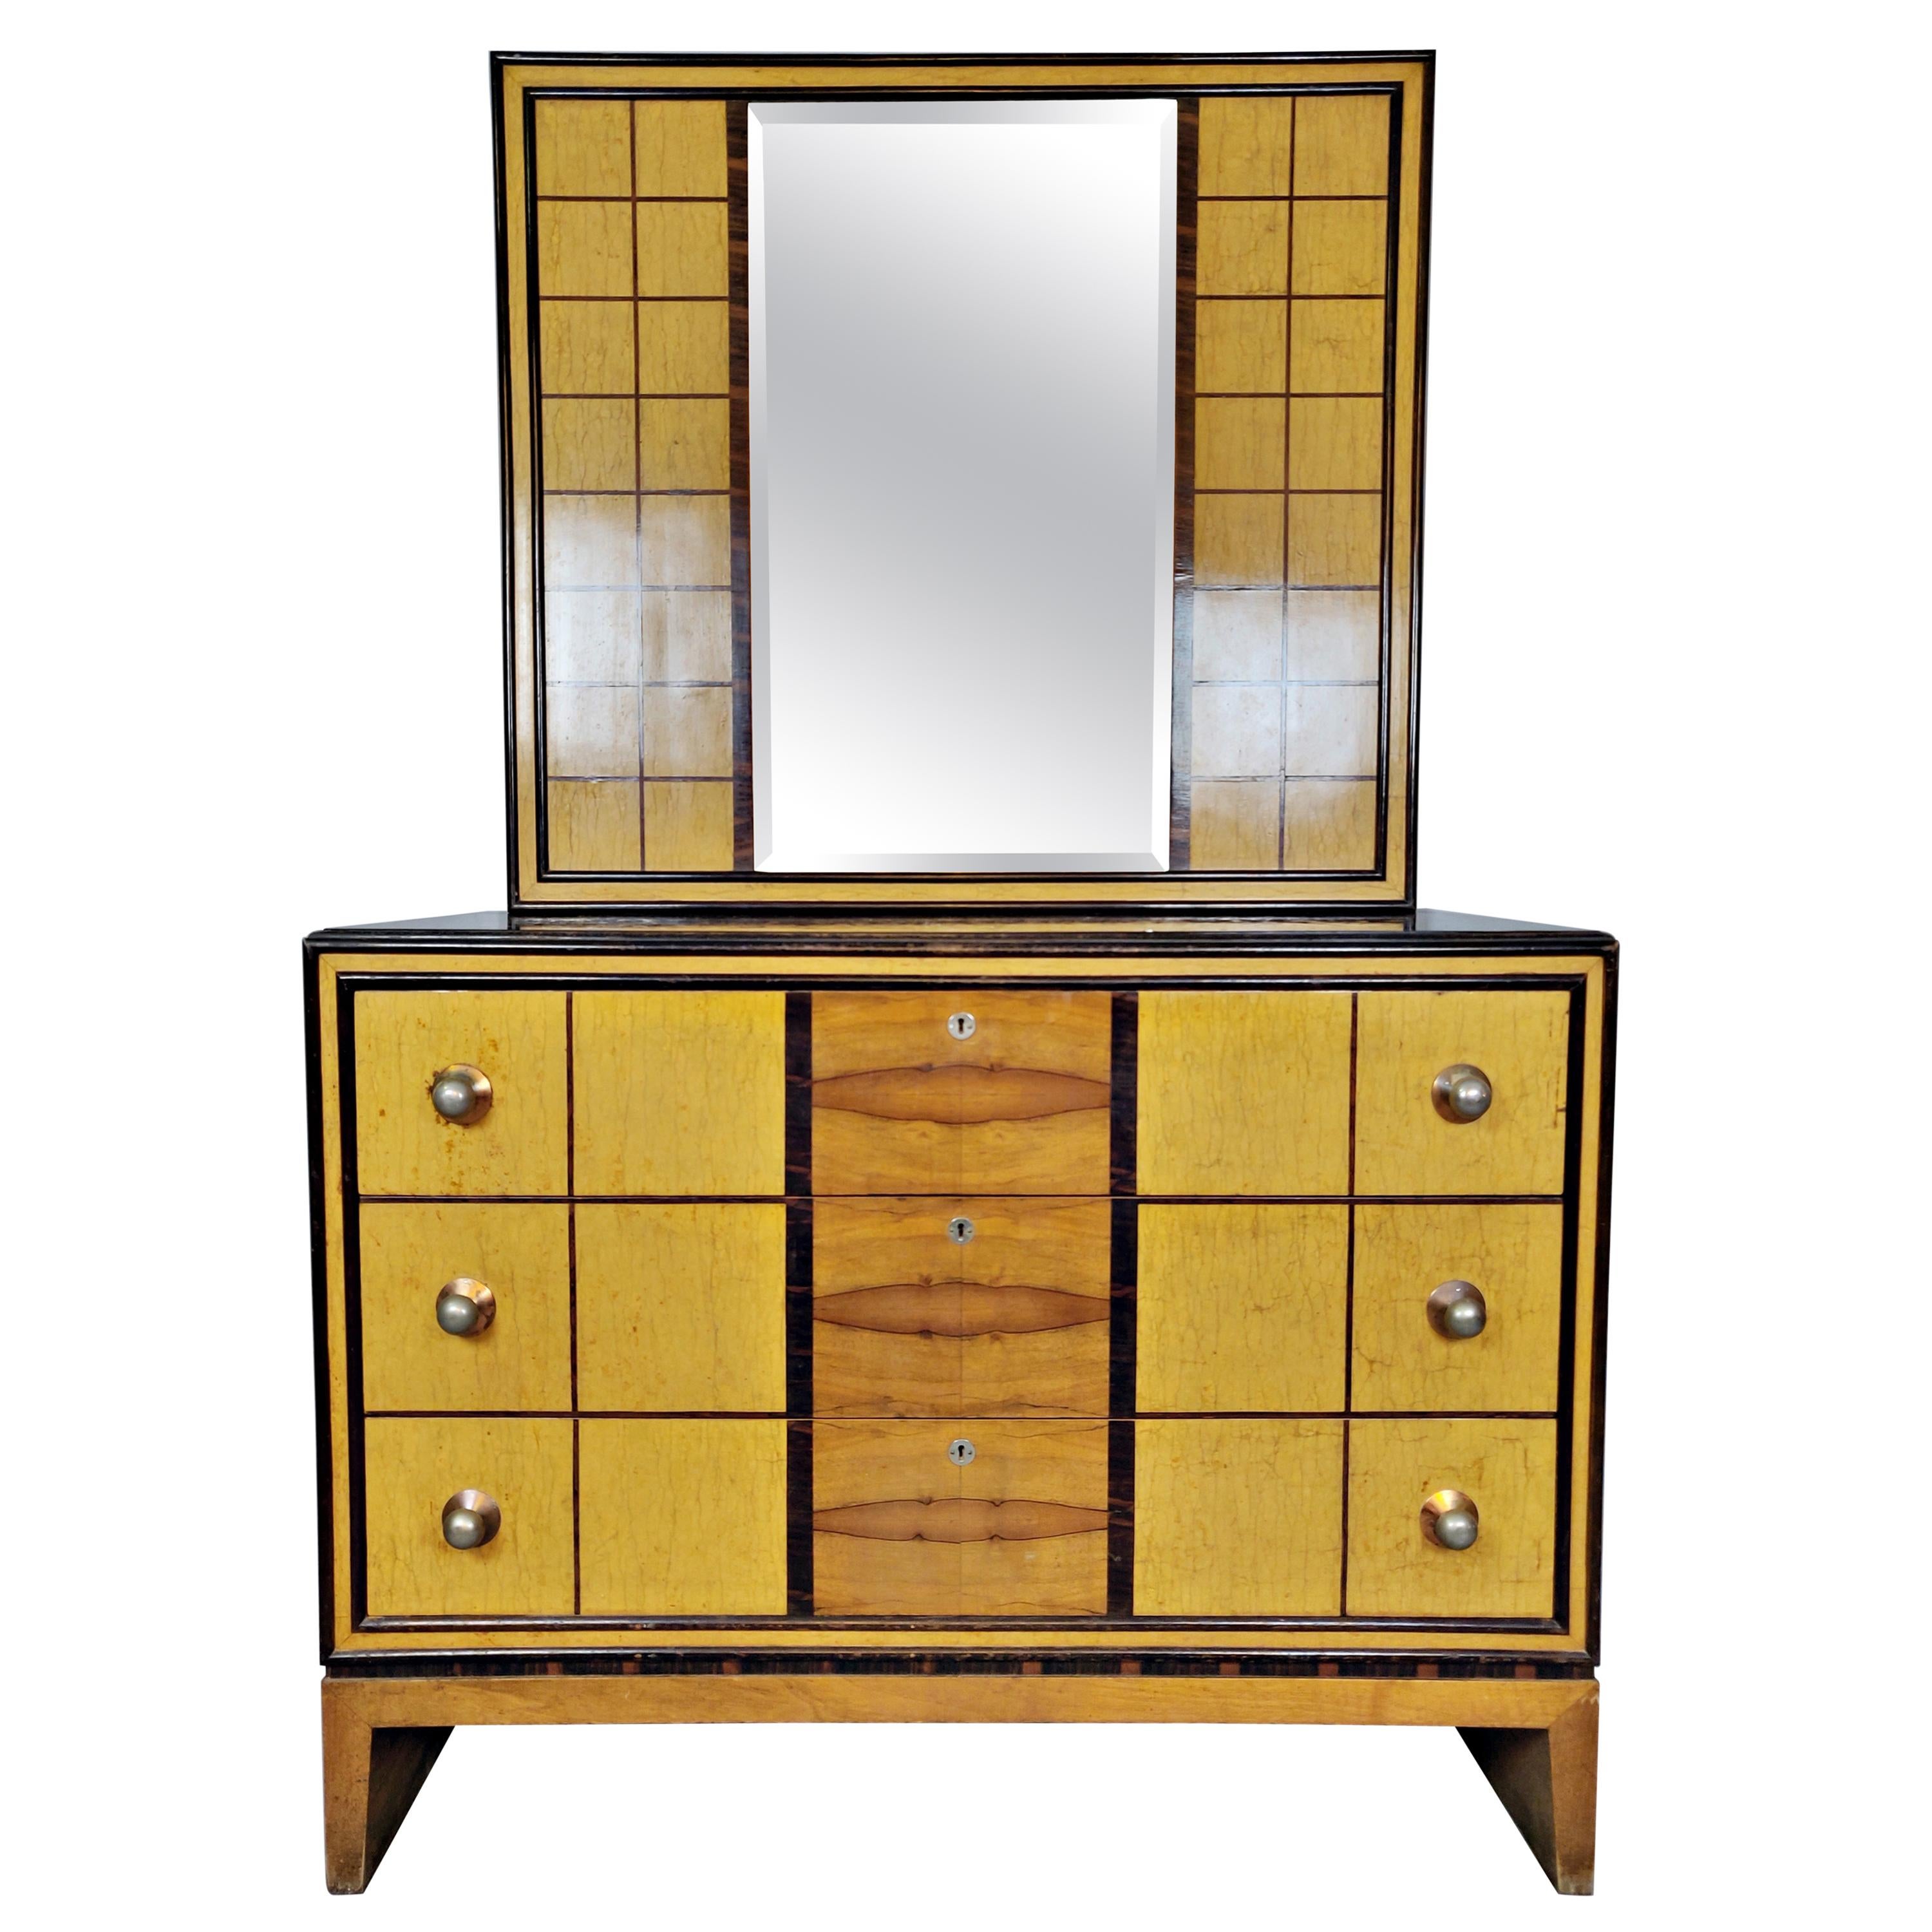 Italian Art Deco Chest of drawers with Standing Mirror For Sale